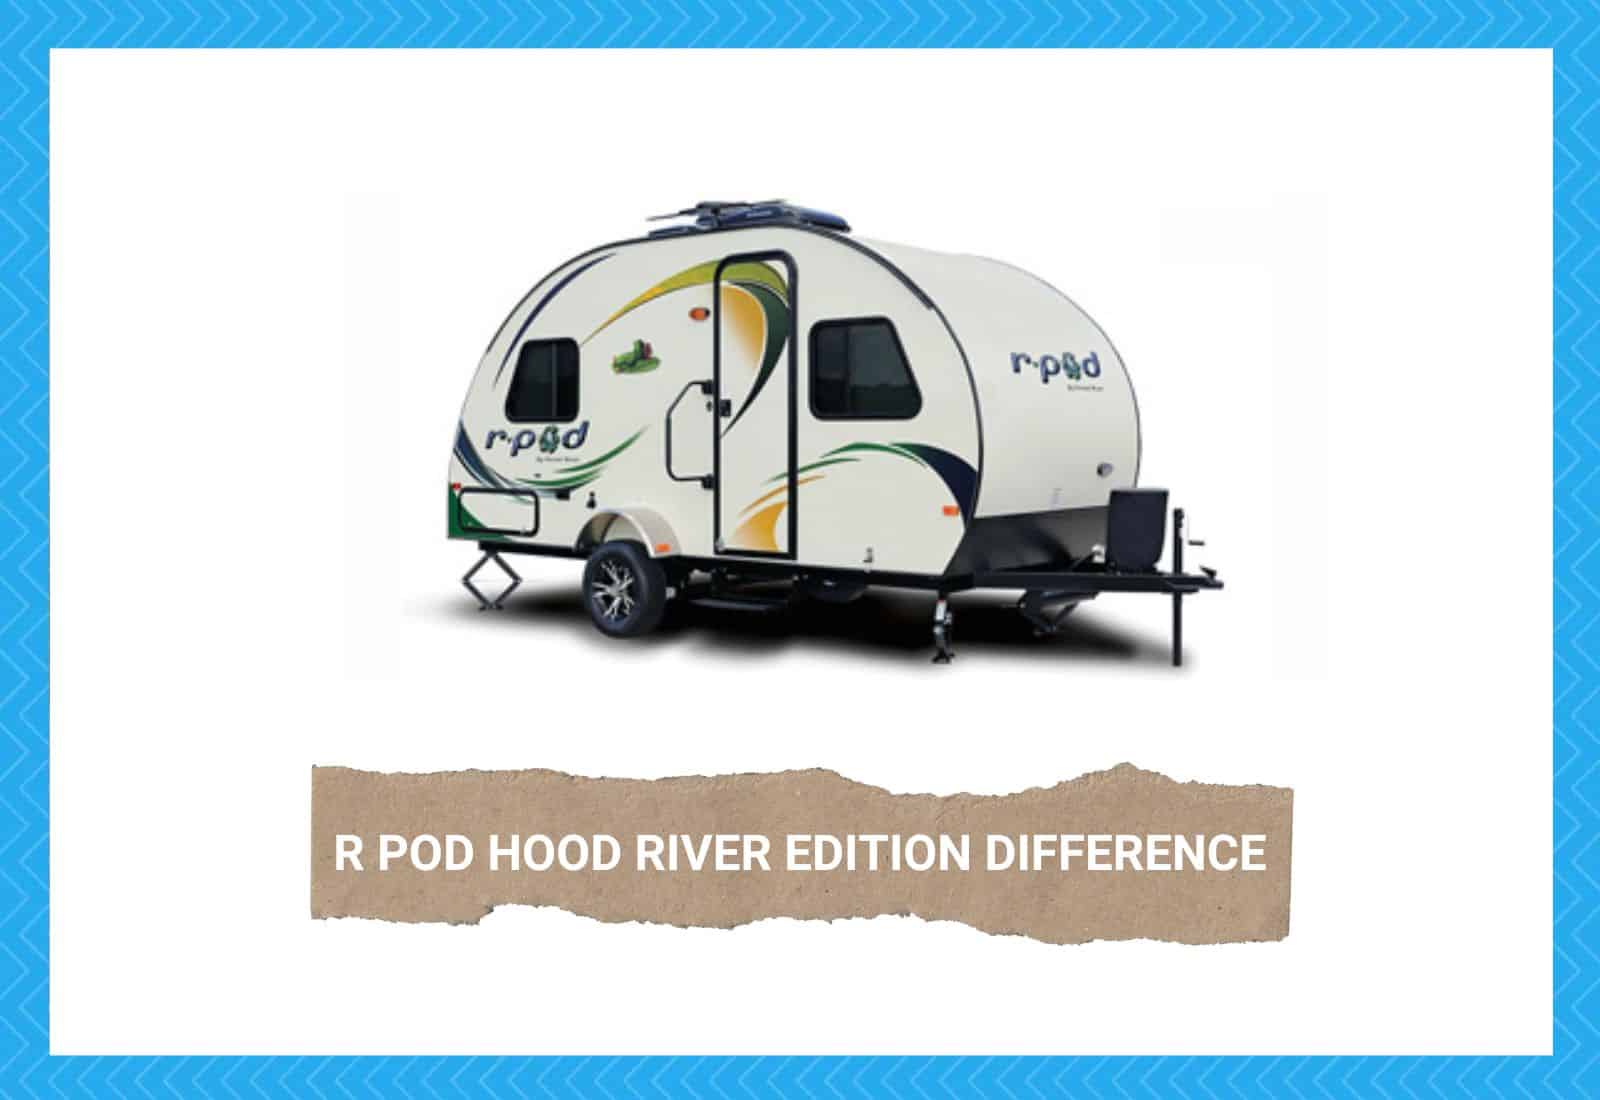 R Pod Hood River Edition Difference